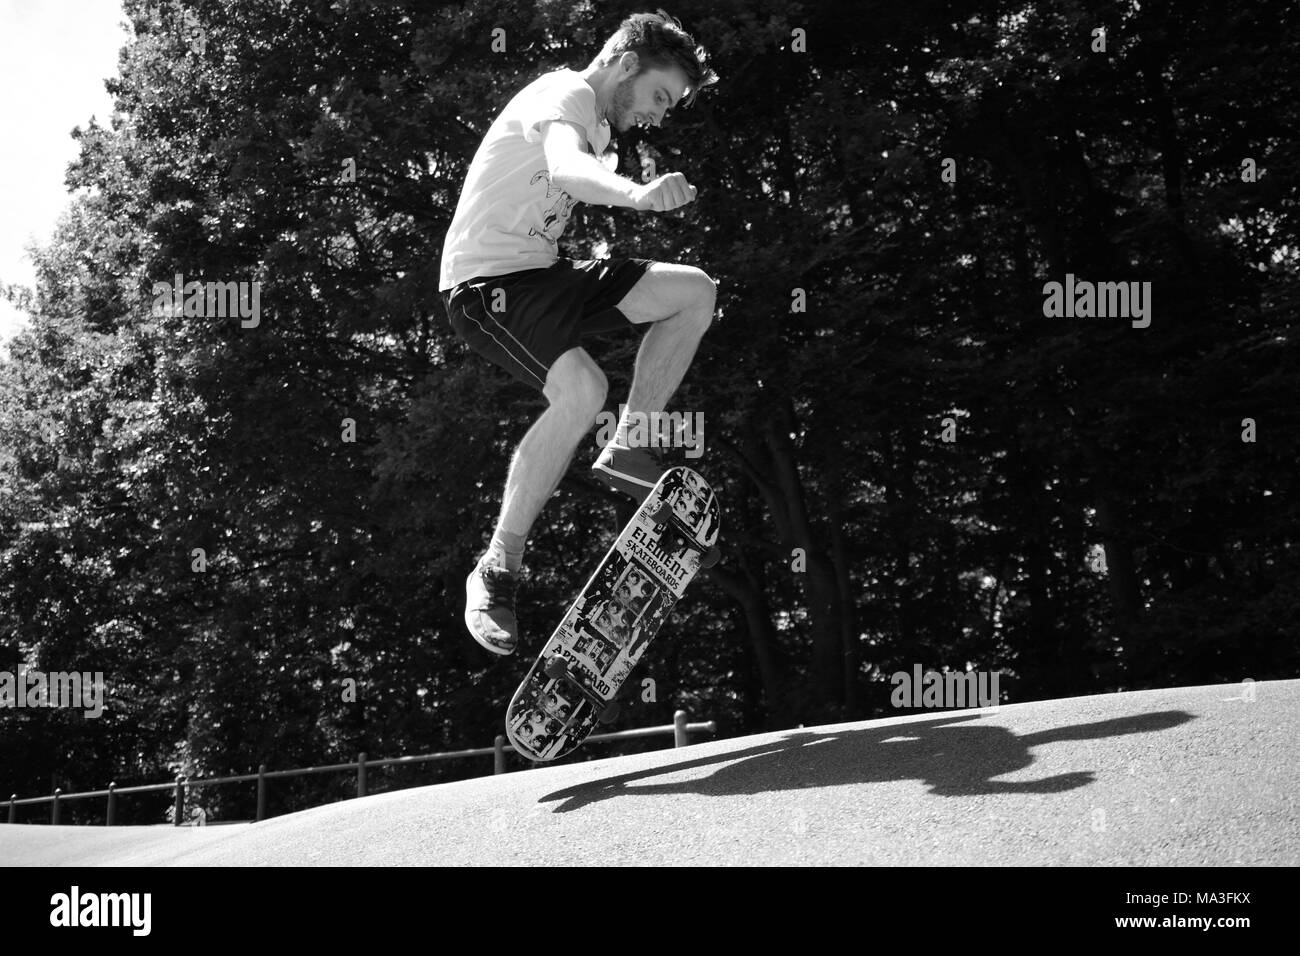 Young man jumps with his skateboard Stock Photo